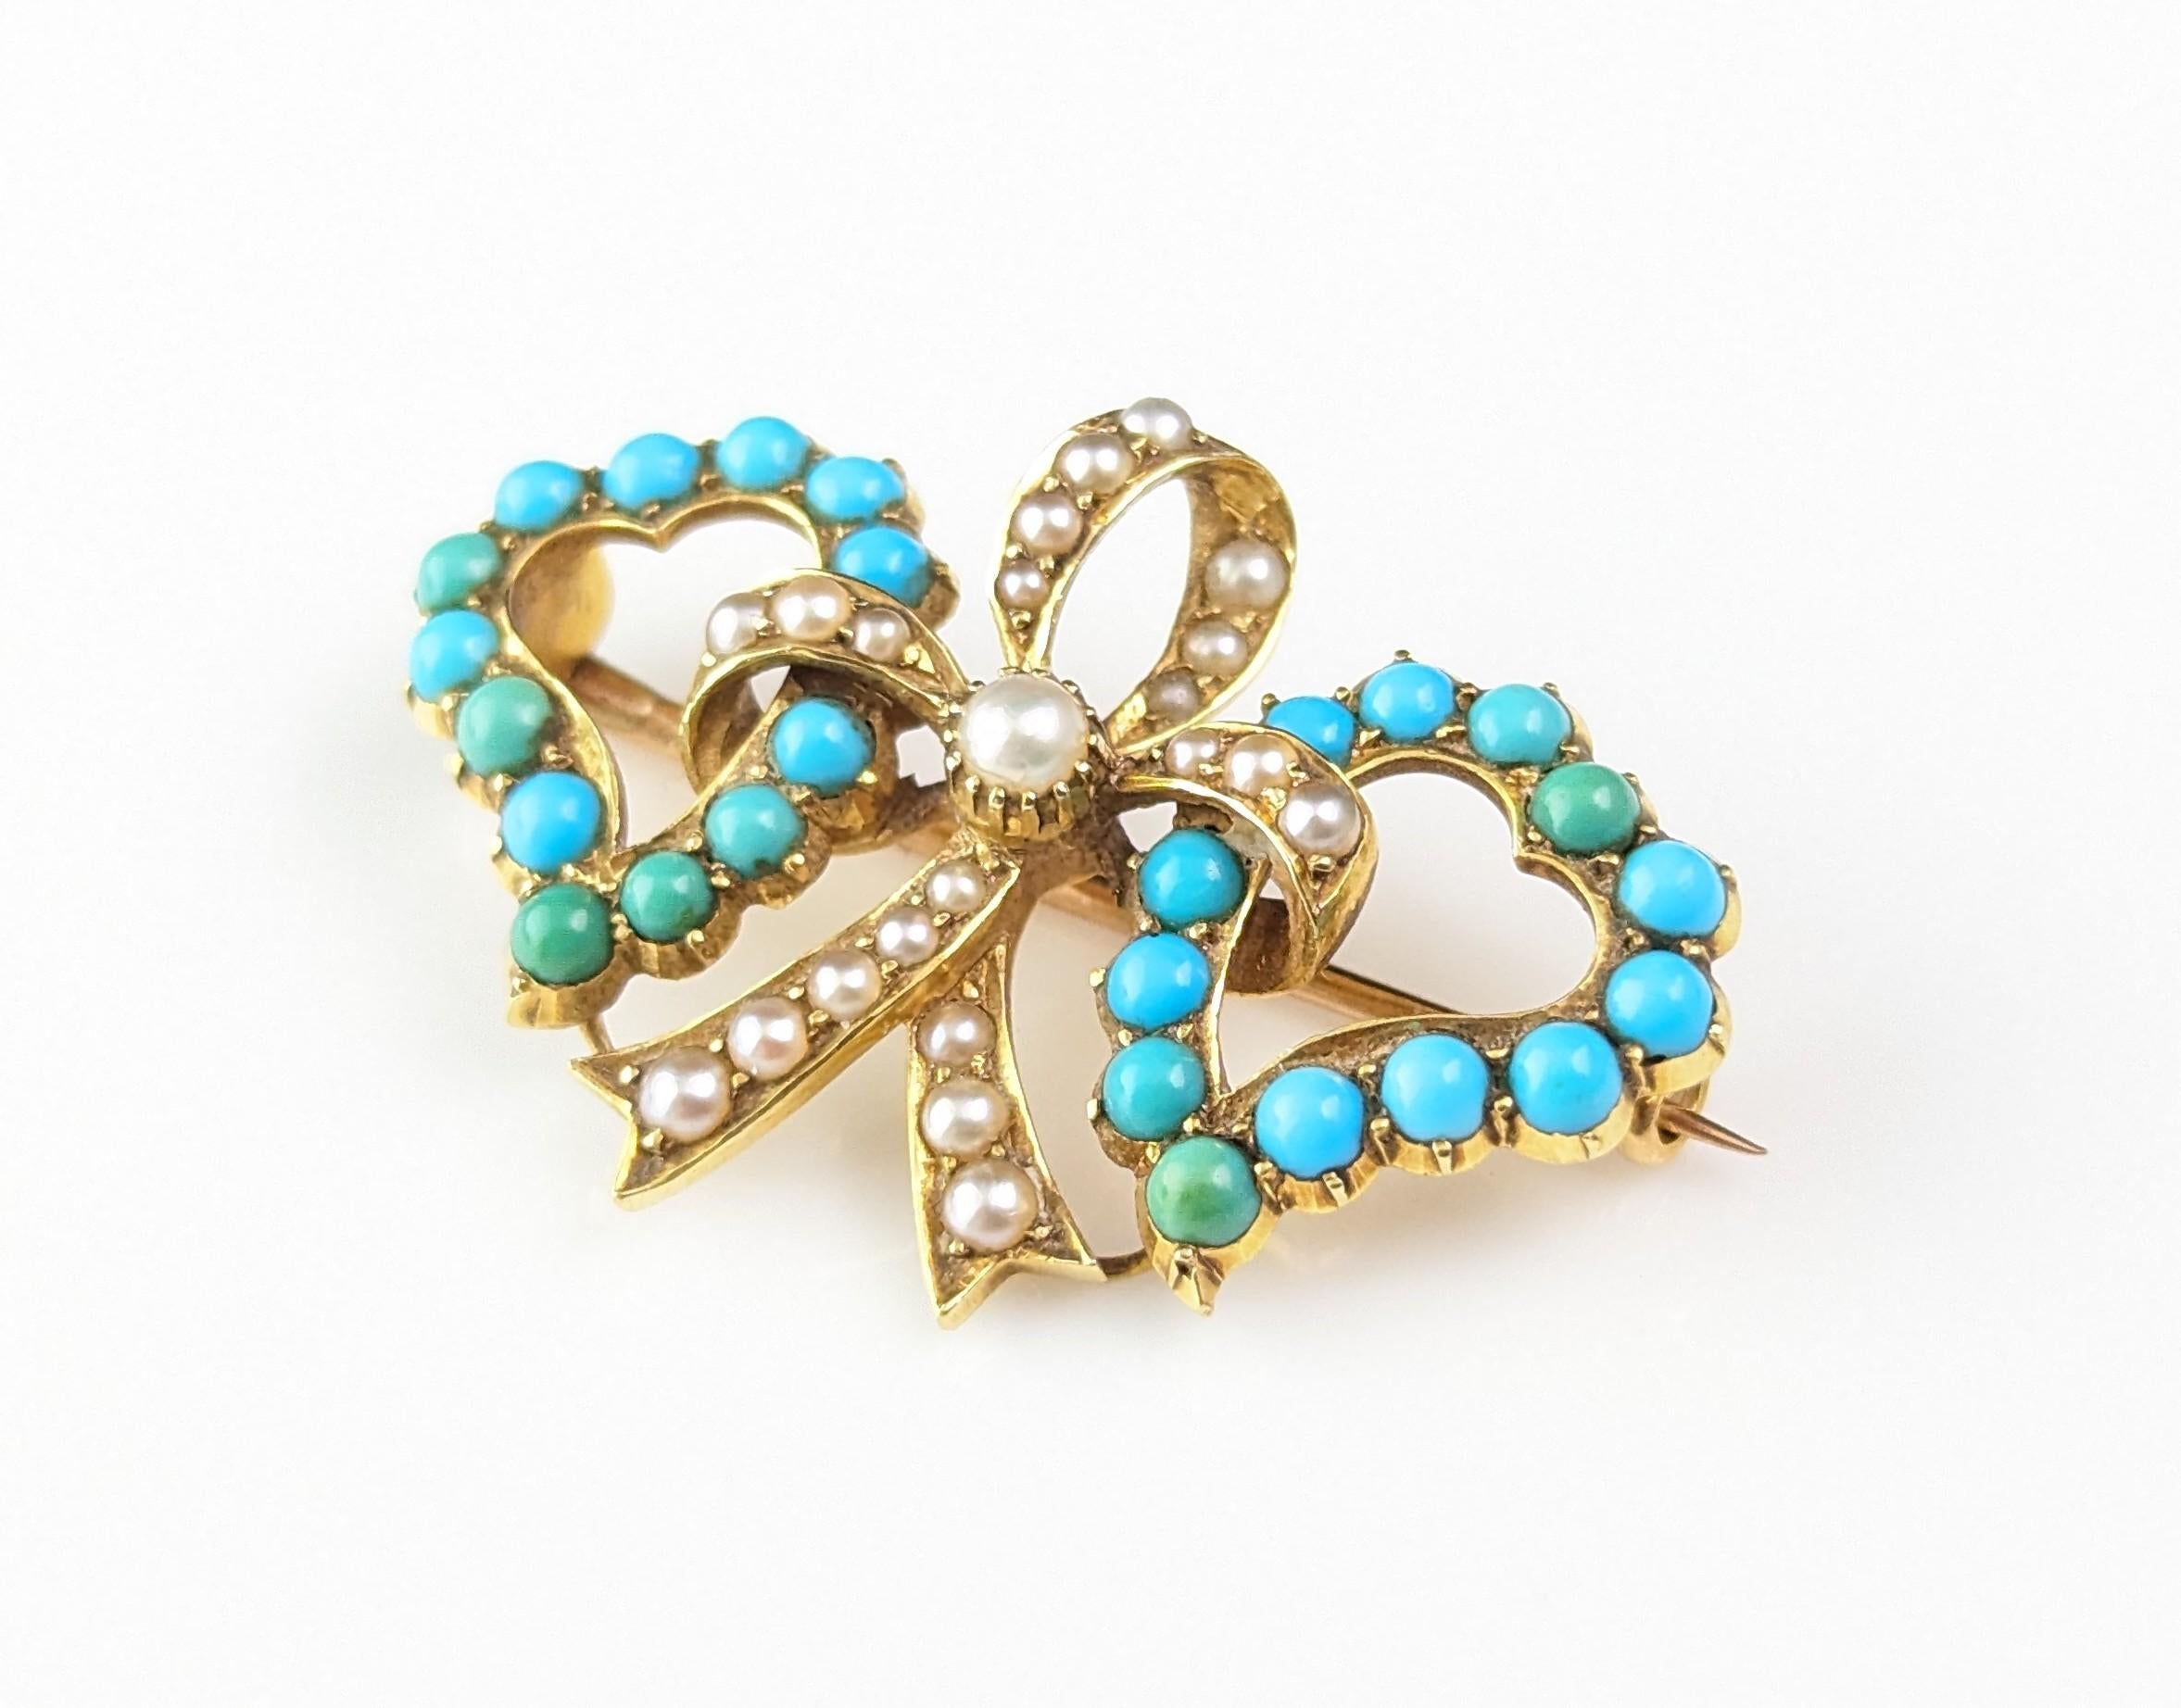 Antique Victorian double Witches heart brooch, 22k gold, Turquoise and pearl  7